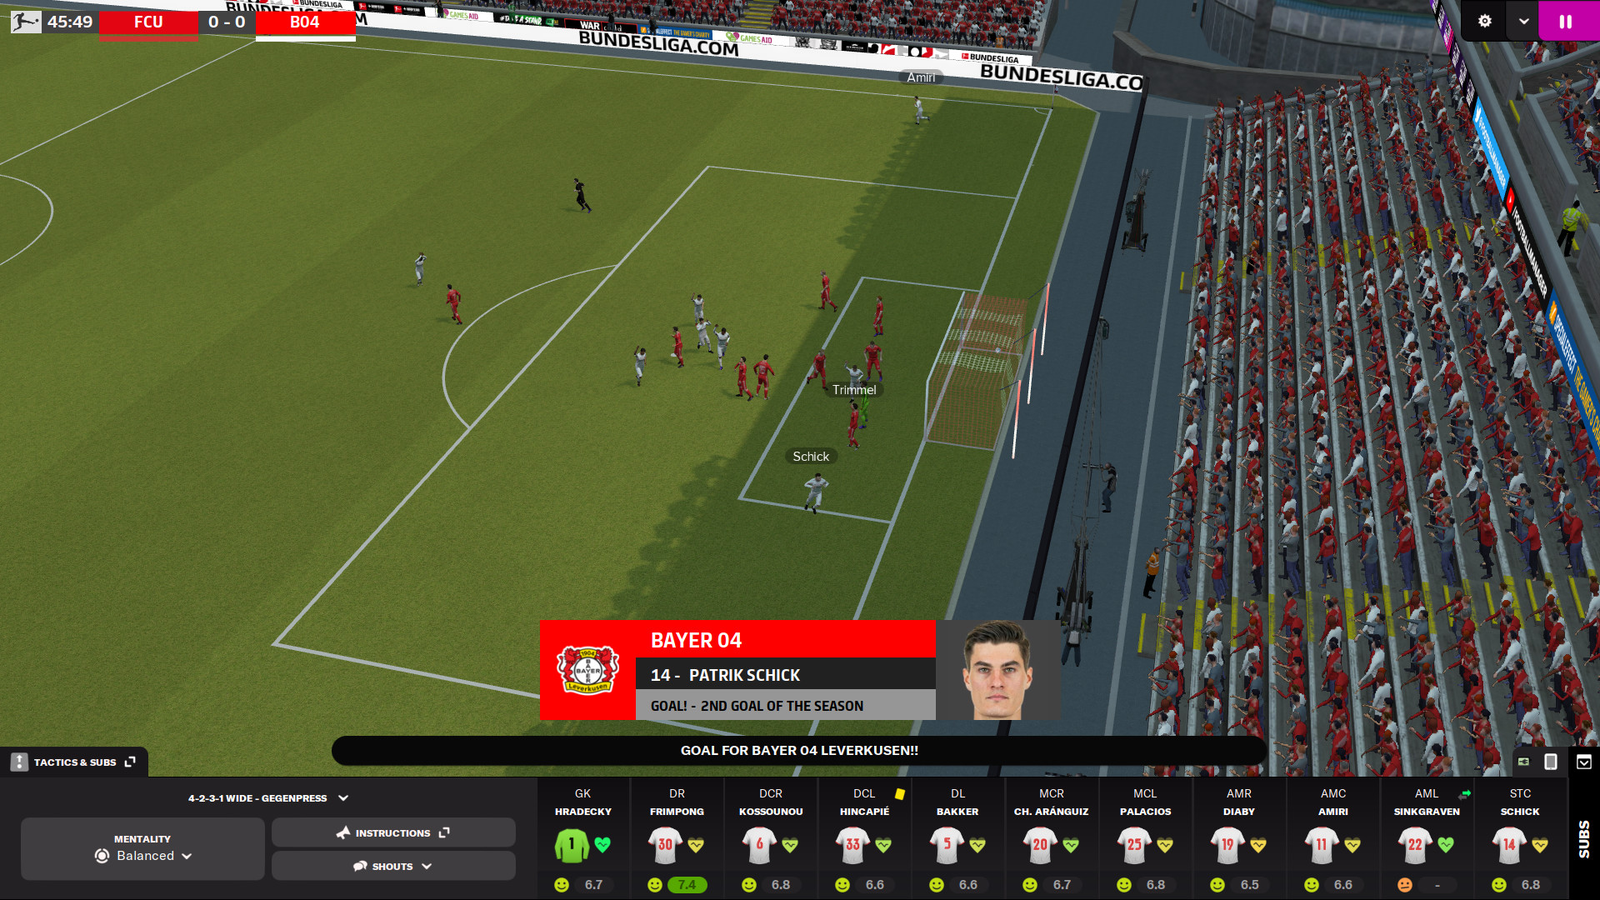 Football Manager 2022: Try for Free Now